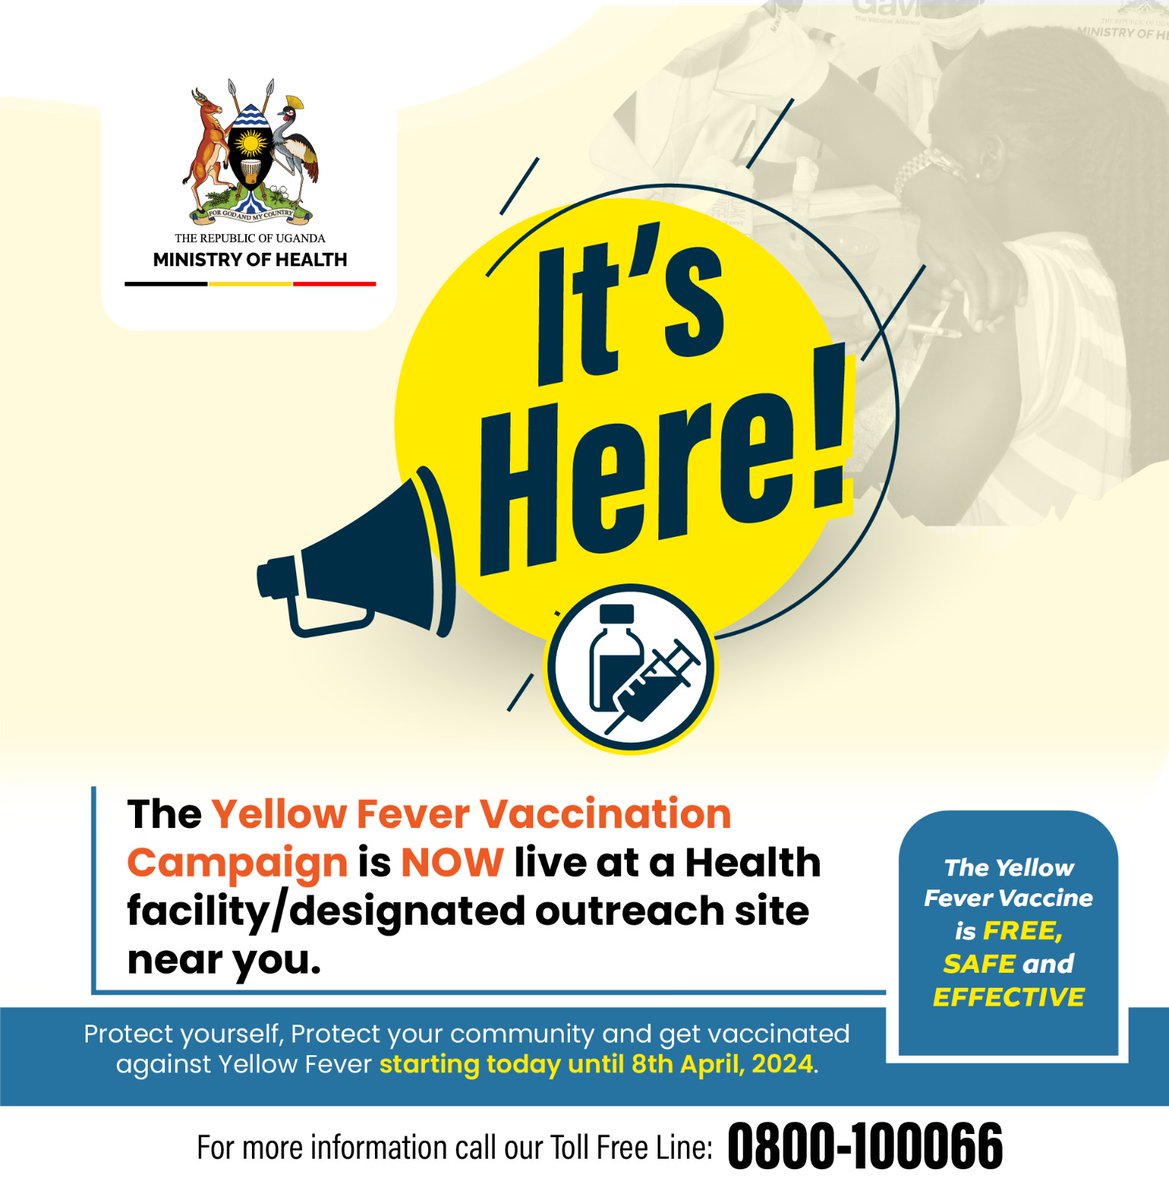 The Yellow Fever Vaccination Campaign starts today until 8th April 2024. The Campaign will run in 53 Districts across the country. The Yellow Fever vaccine is offered FREE of Charge at Government Health Facilities and designated outreach sites #YellowFeverFreeUG